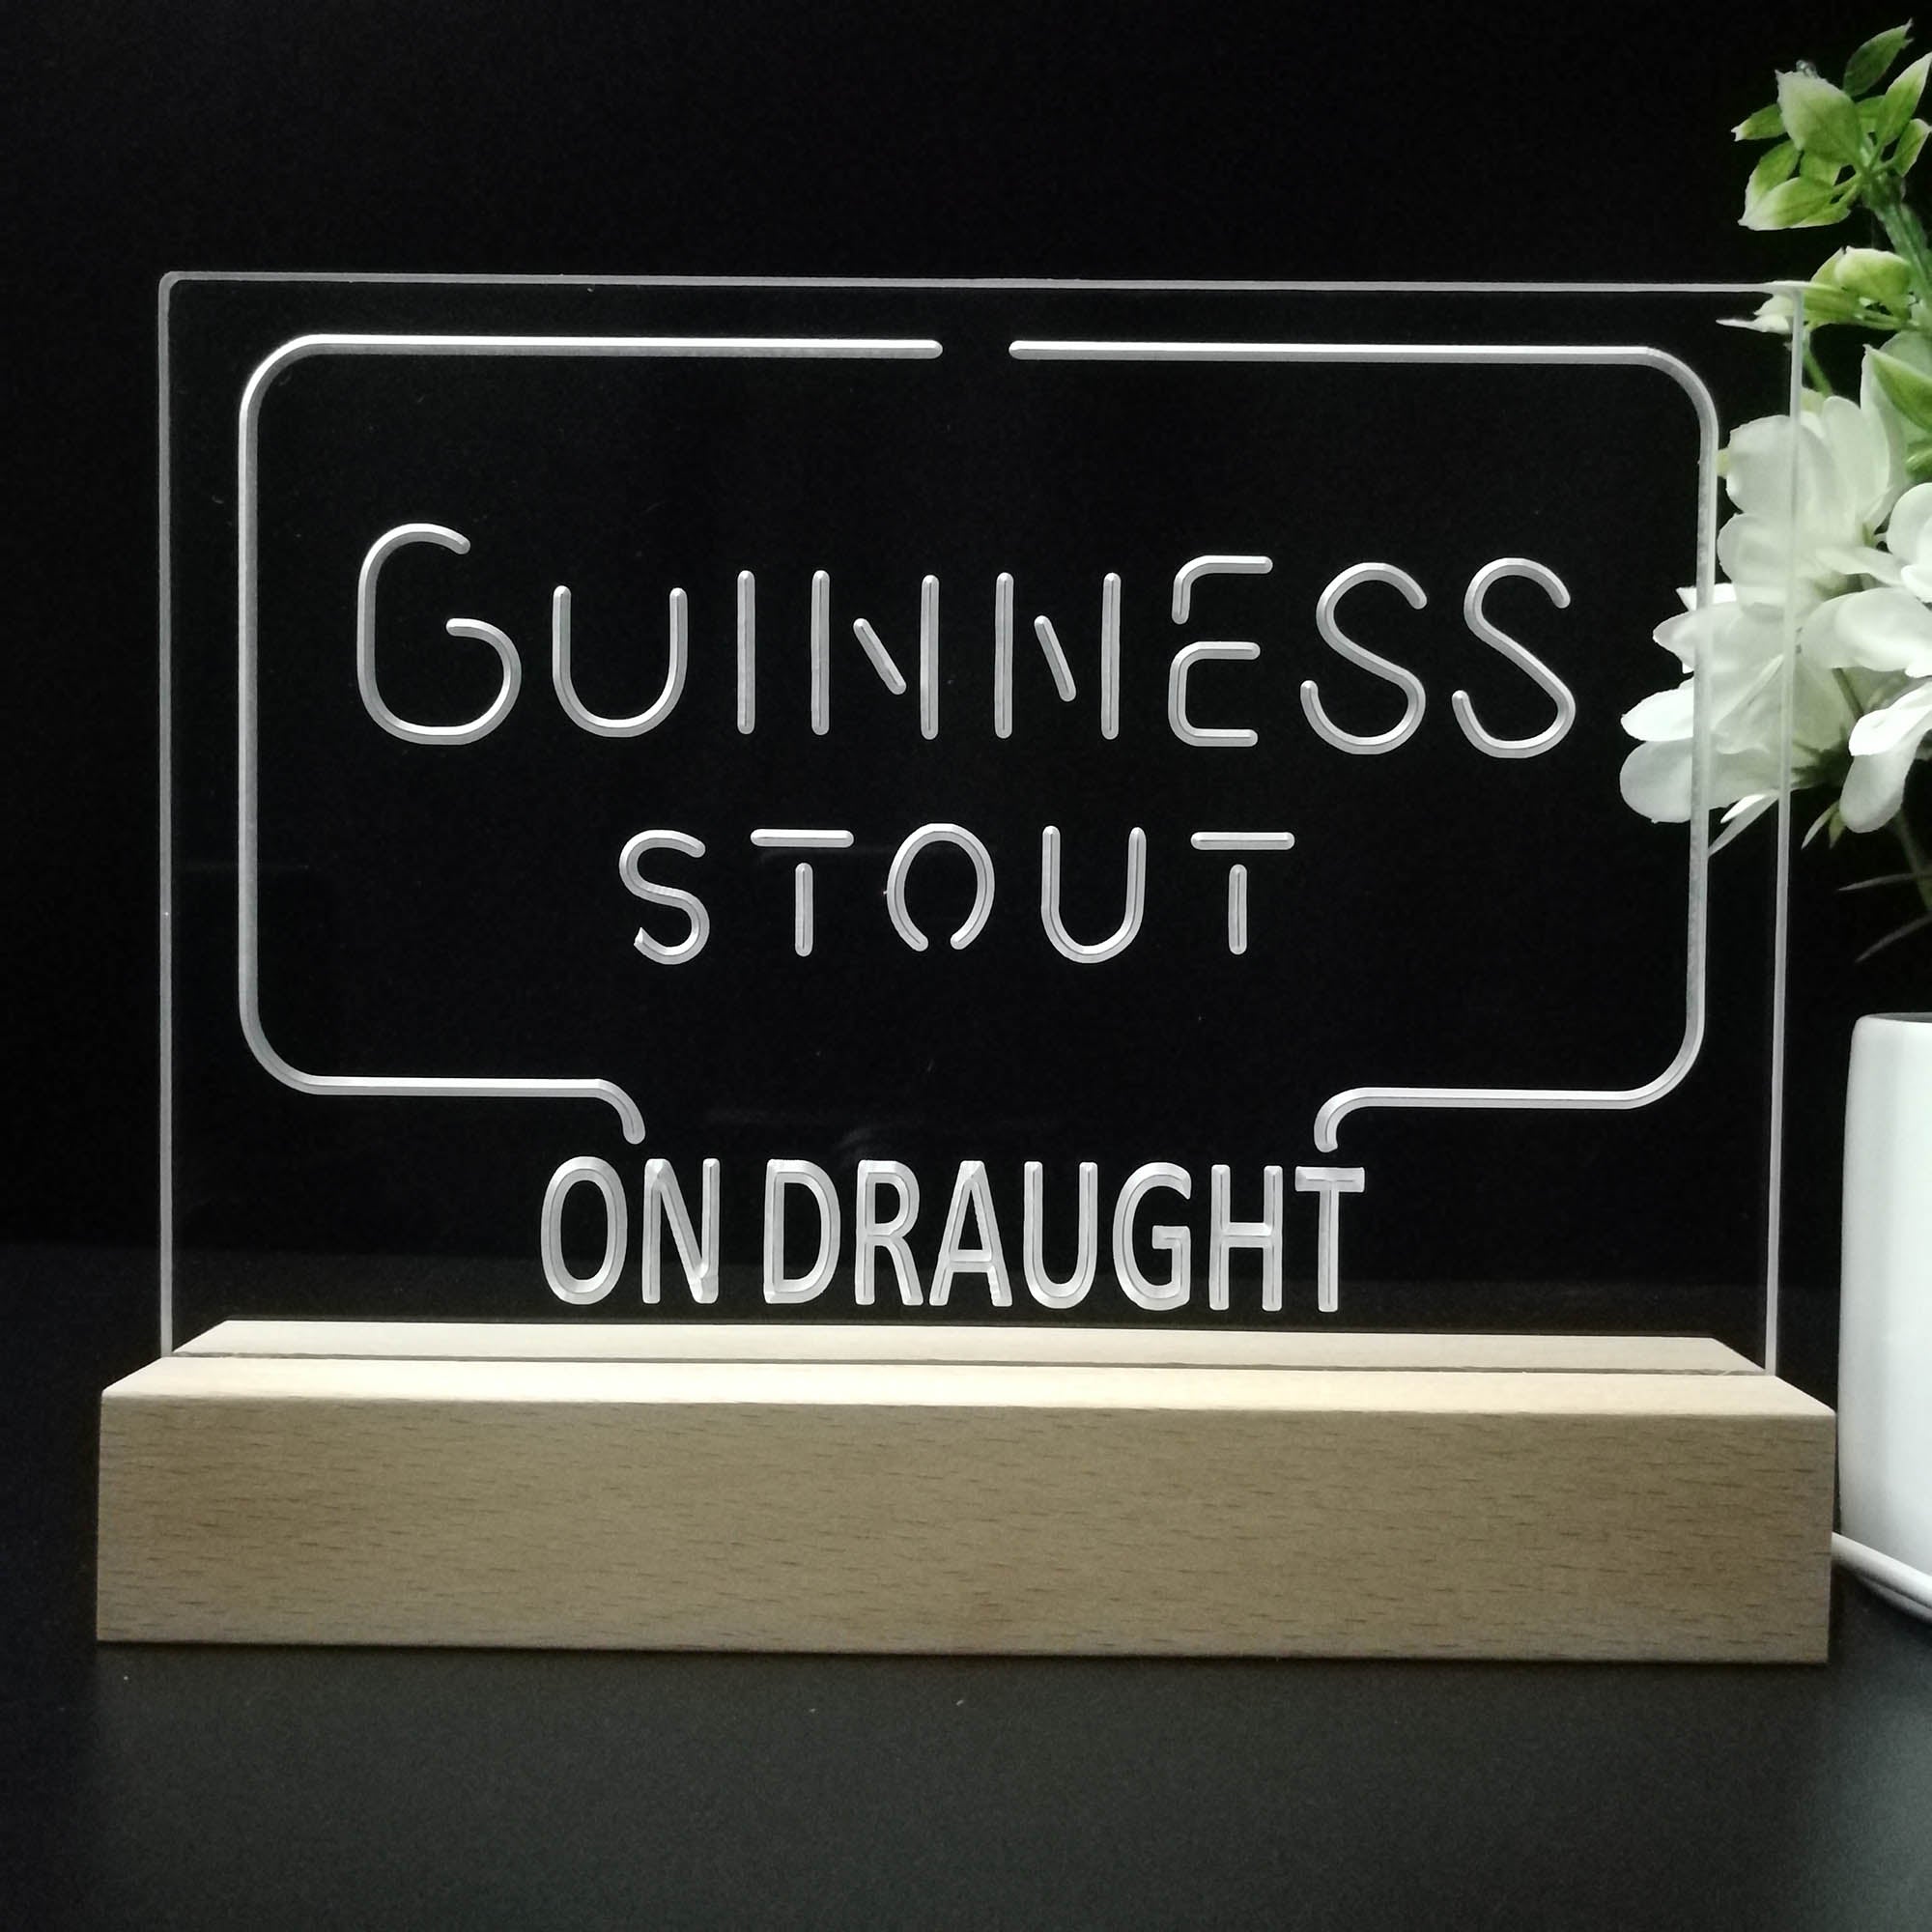 Guinness Dry Stout On Draught Neon Sign Pub Bar Lamp